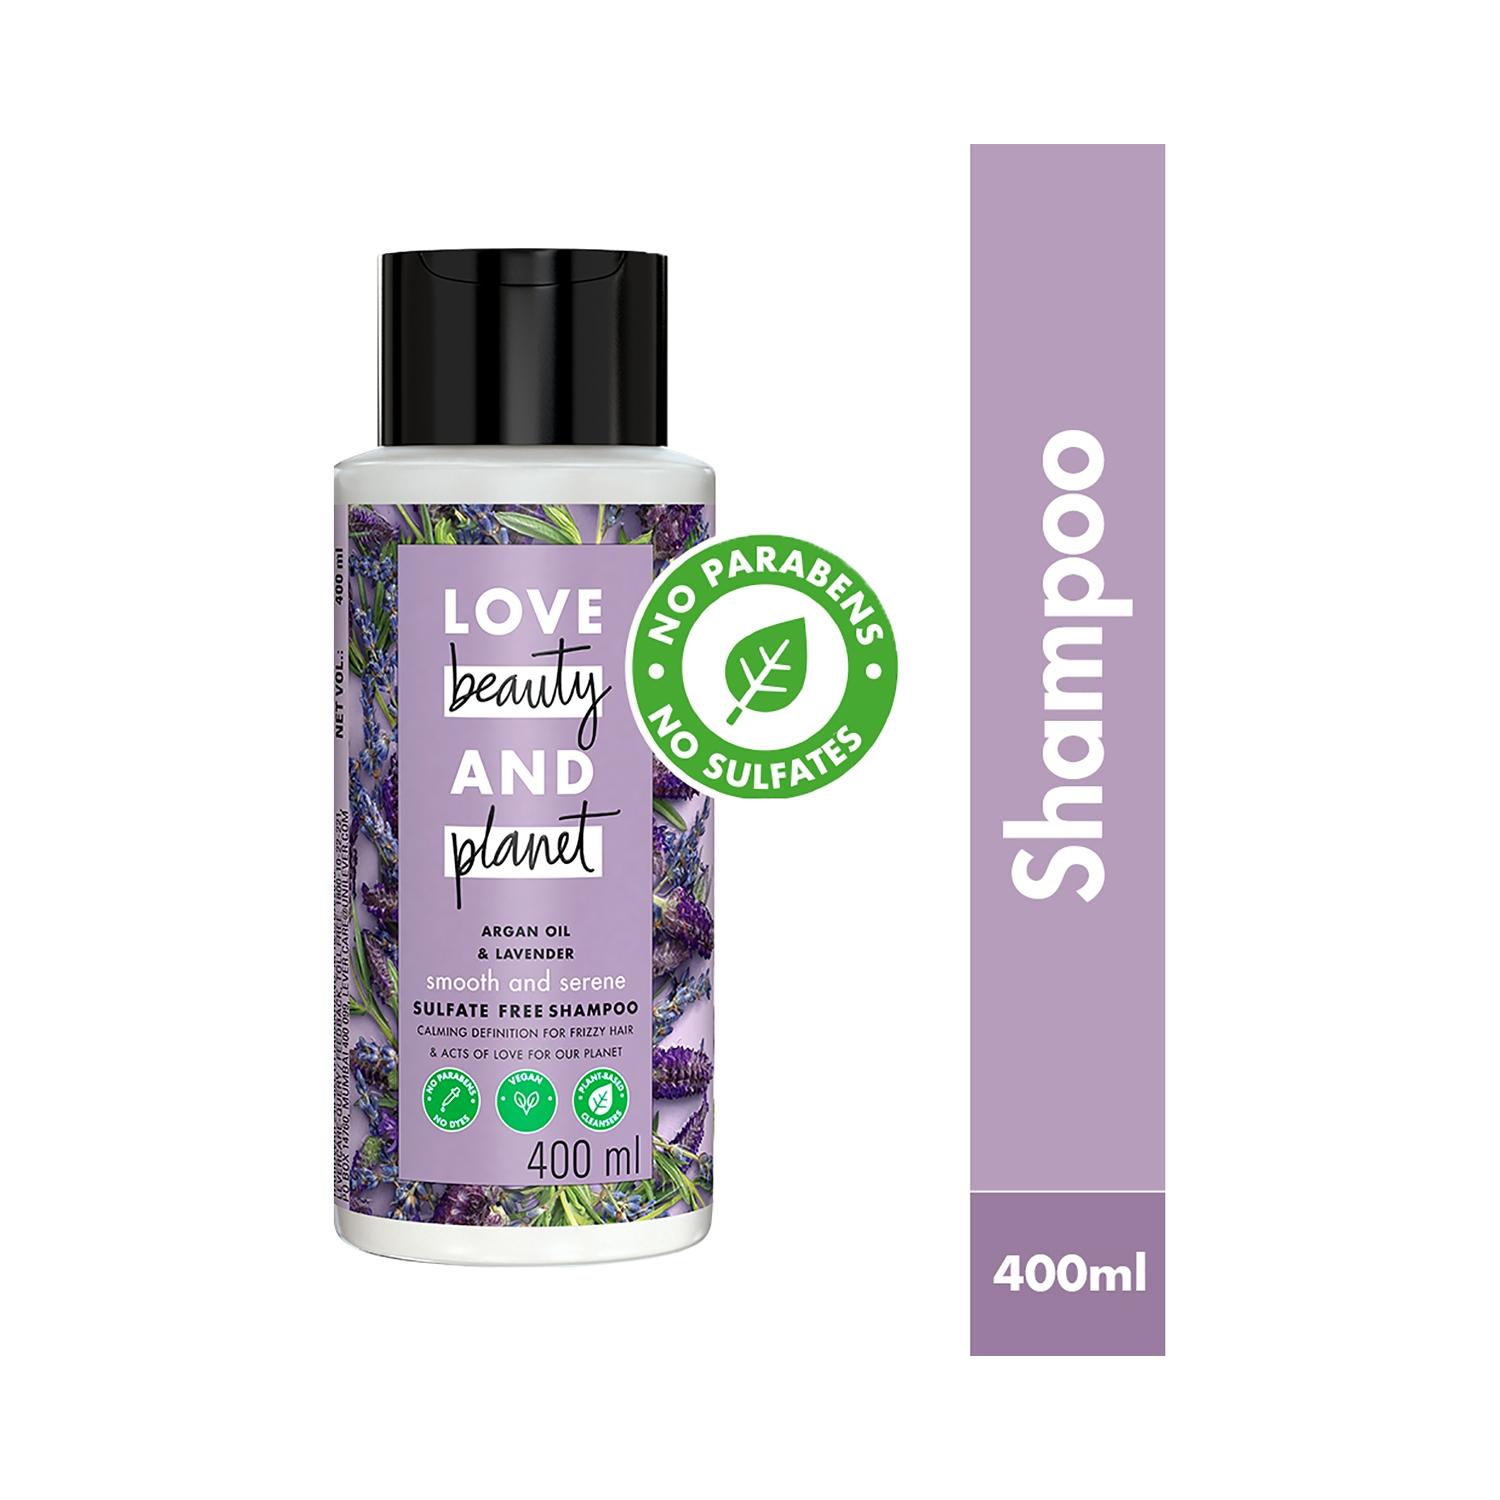 love beauty & planet argan oil and lavender smooth and serene shampoo (400ml)